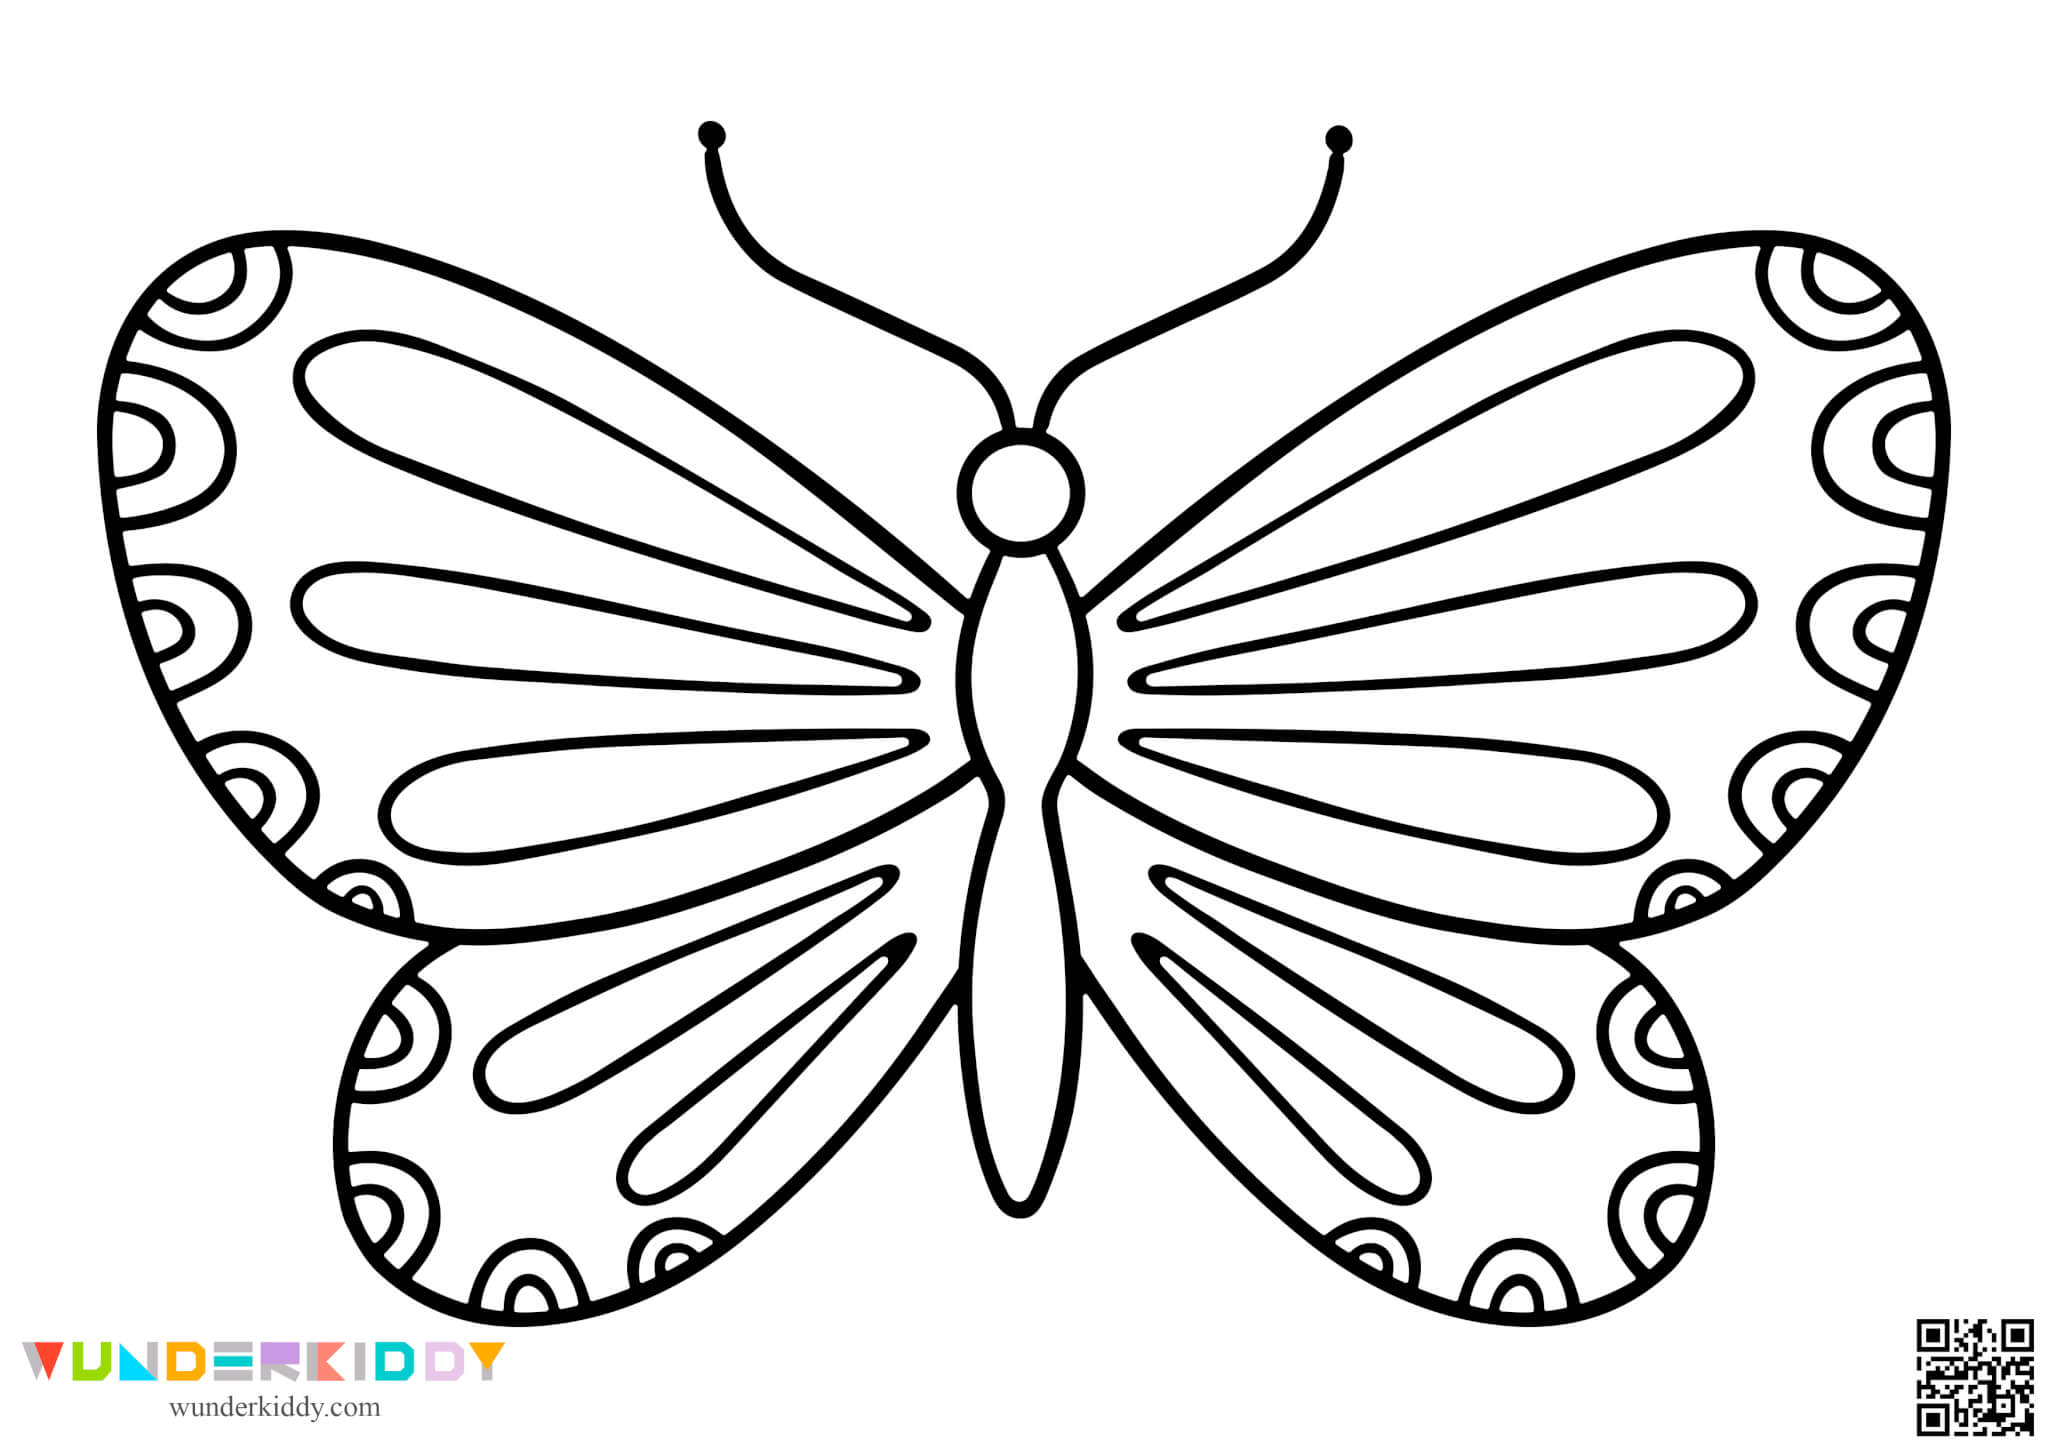 Butterfly Template Printable - Image 10